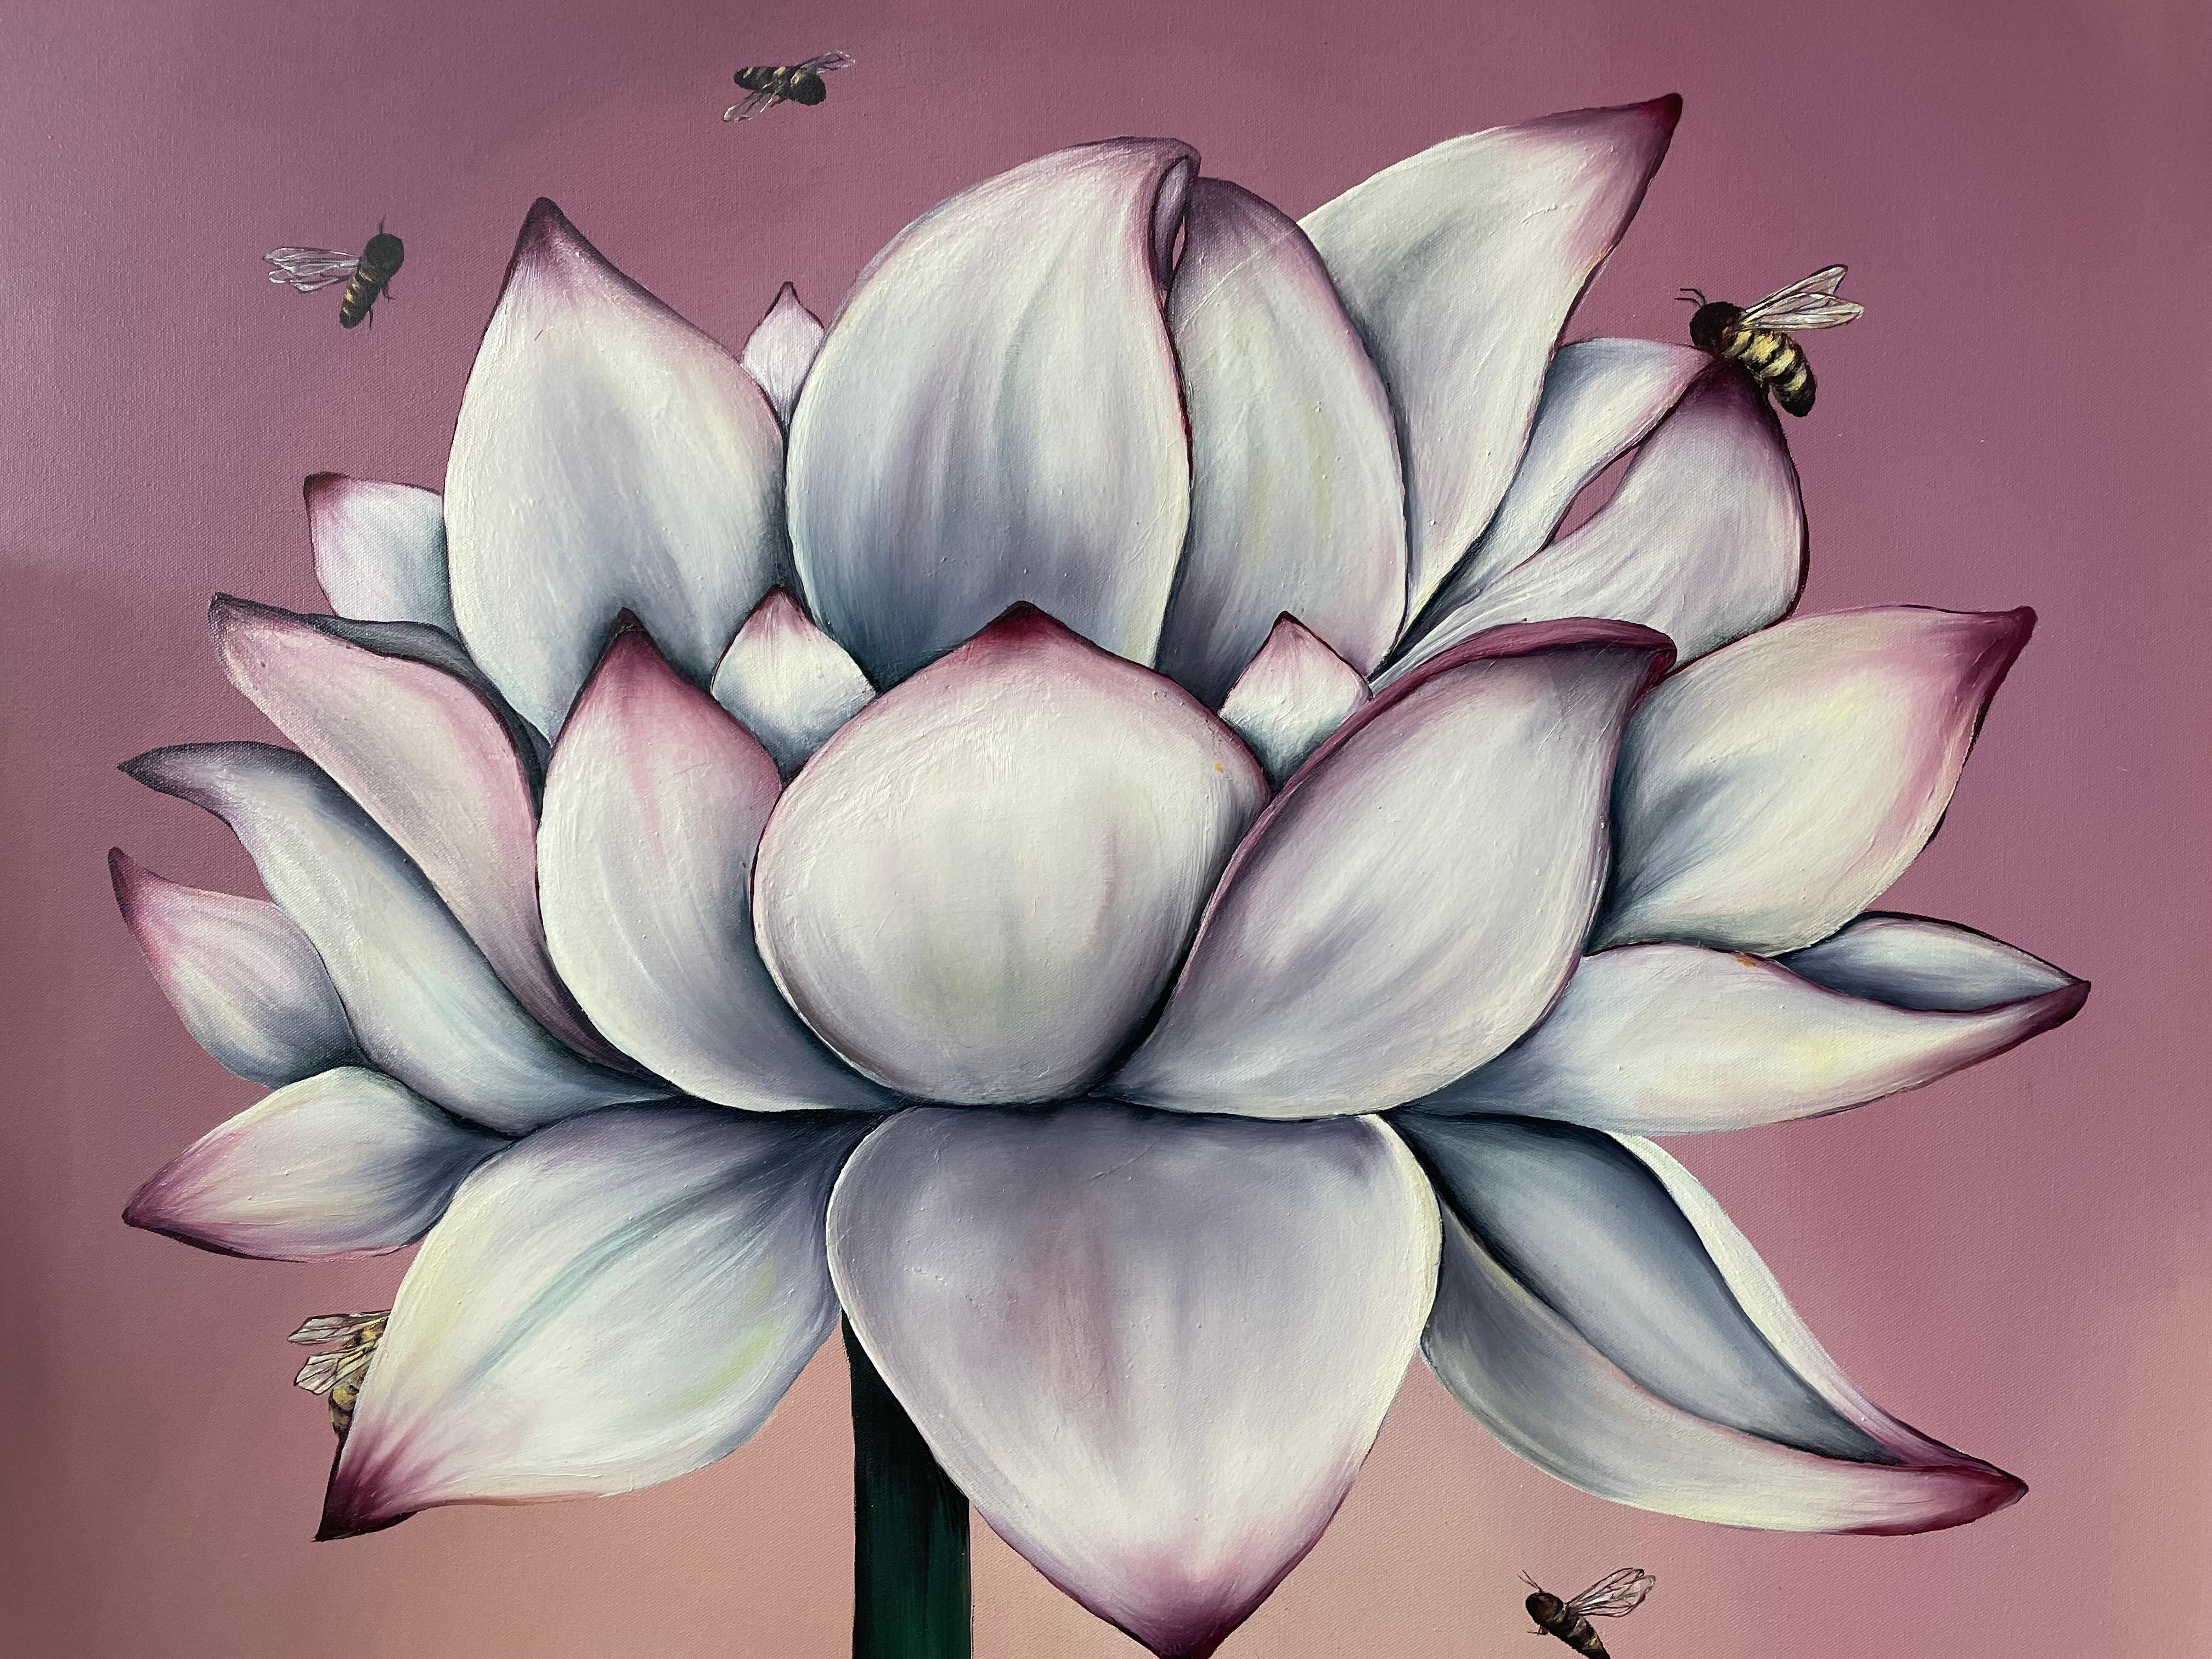 Pollinate Me - Contemporary Painting by Allison Green